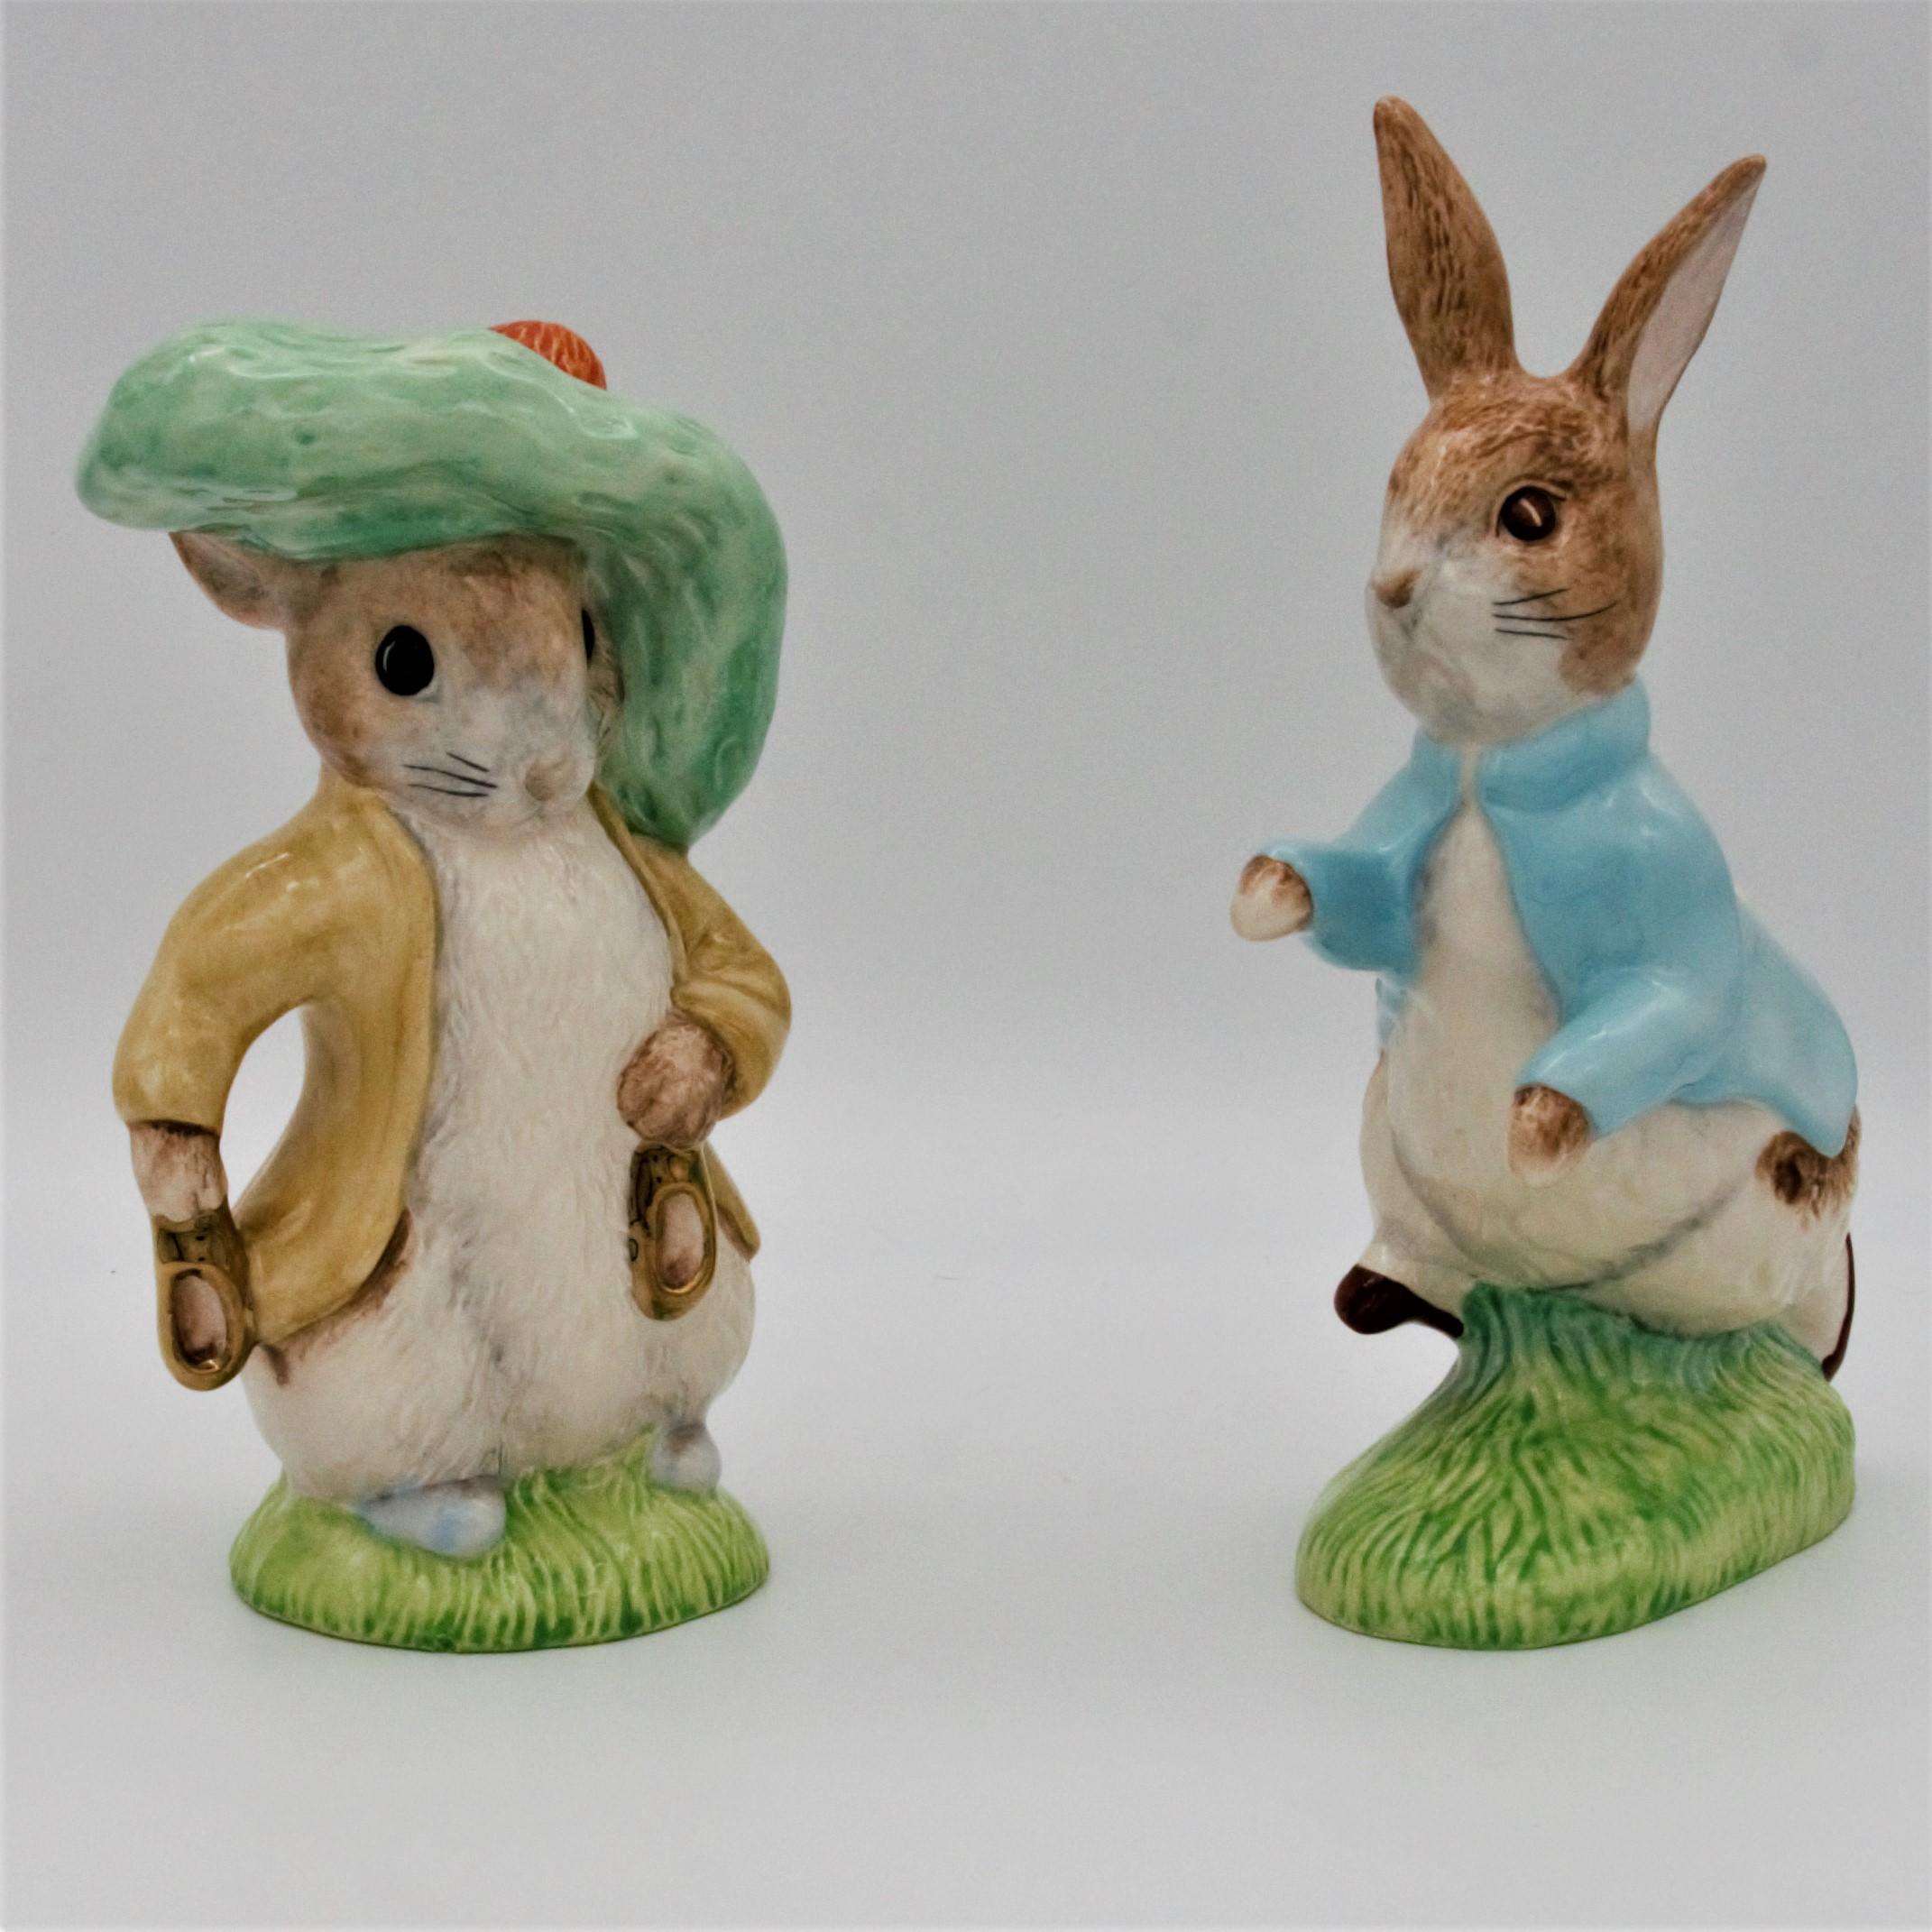 Beswick Beatrix Potter 3356/2 Peter Rabbit and 3403/2 Benjamin Bunny Limited Edition Pair - front